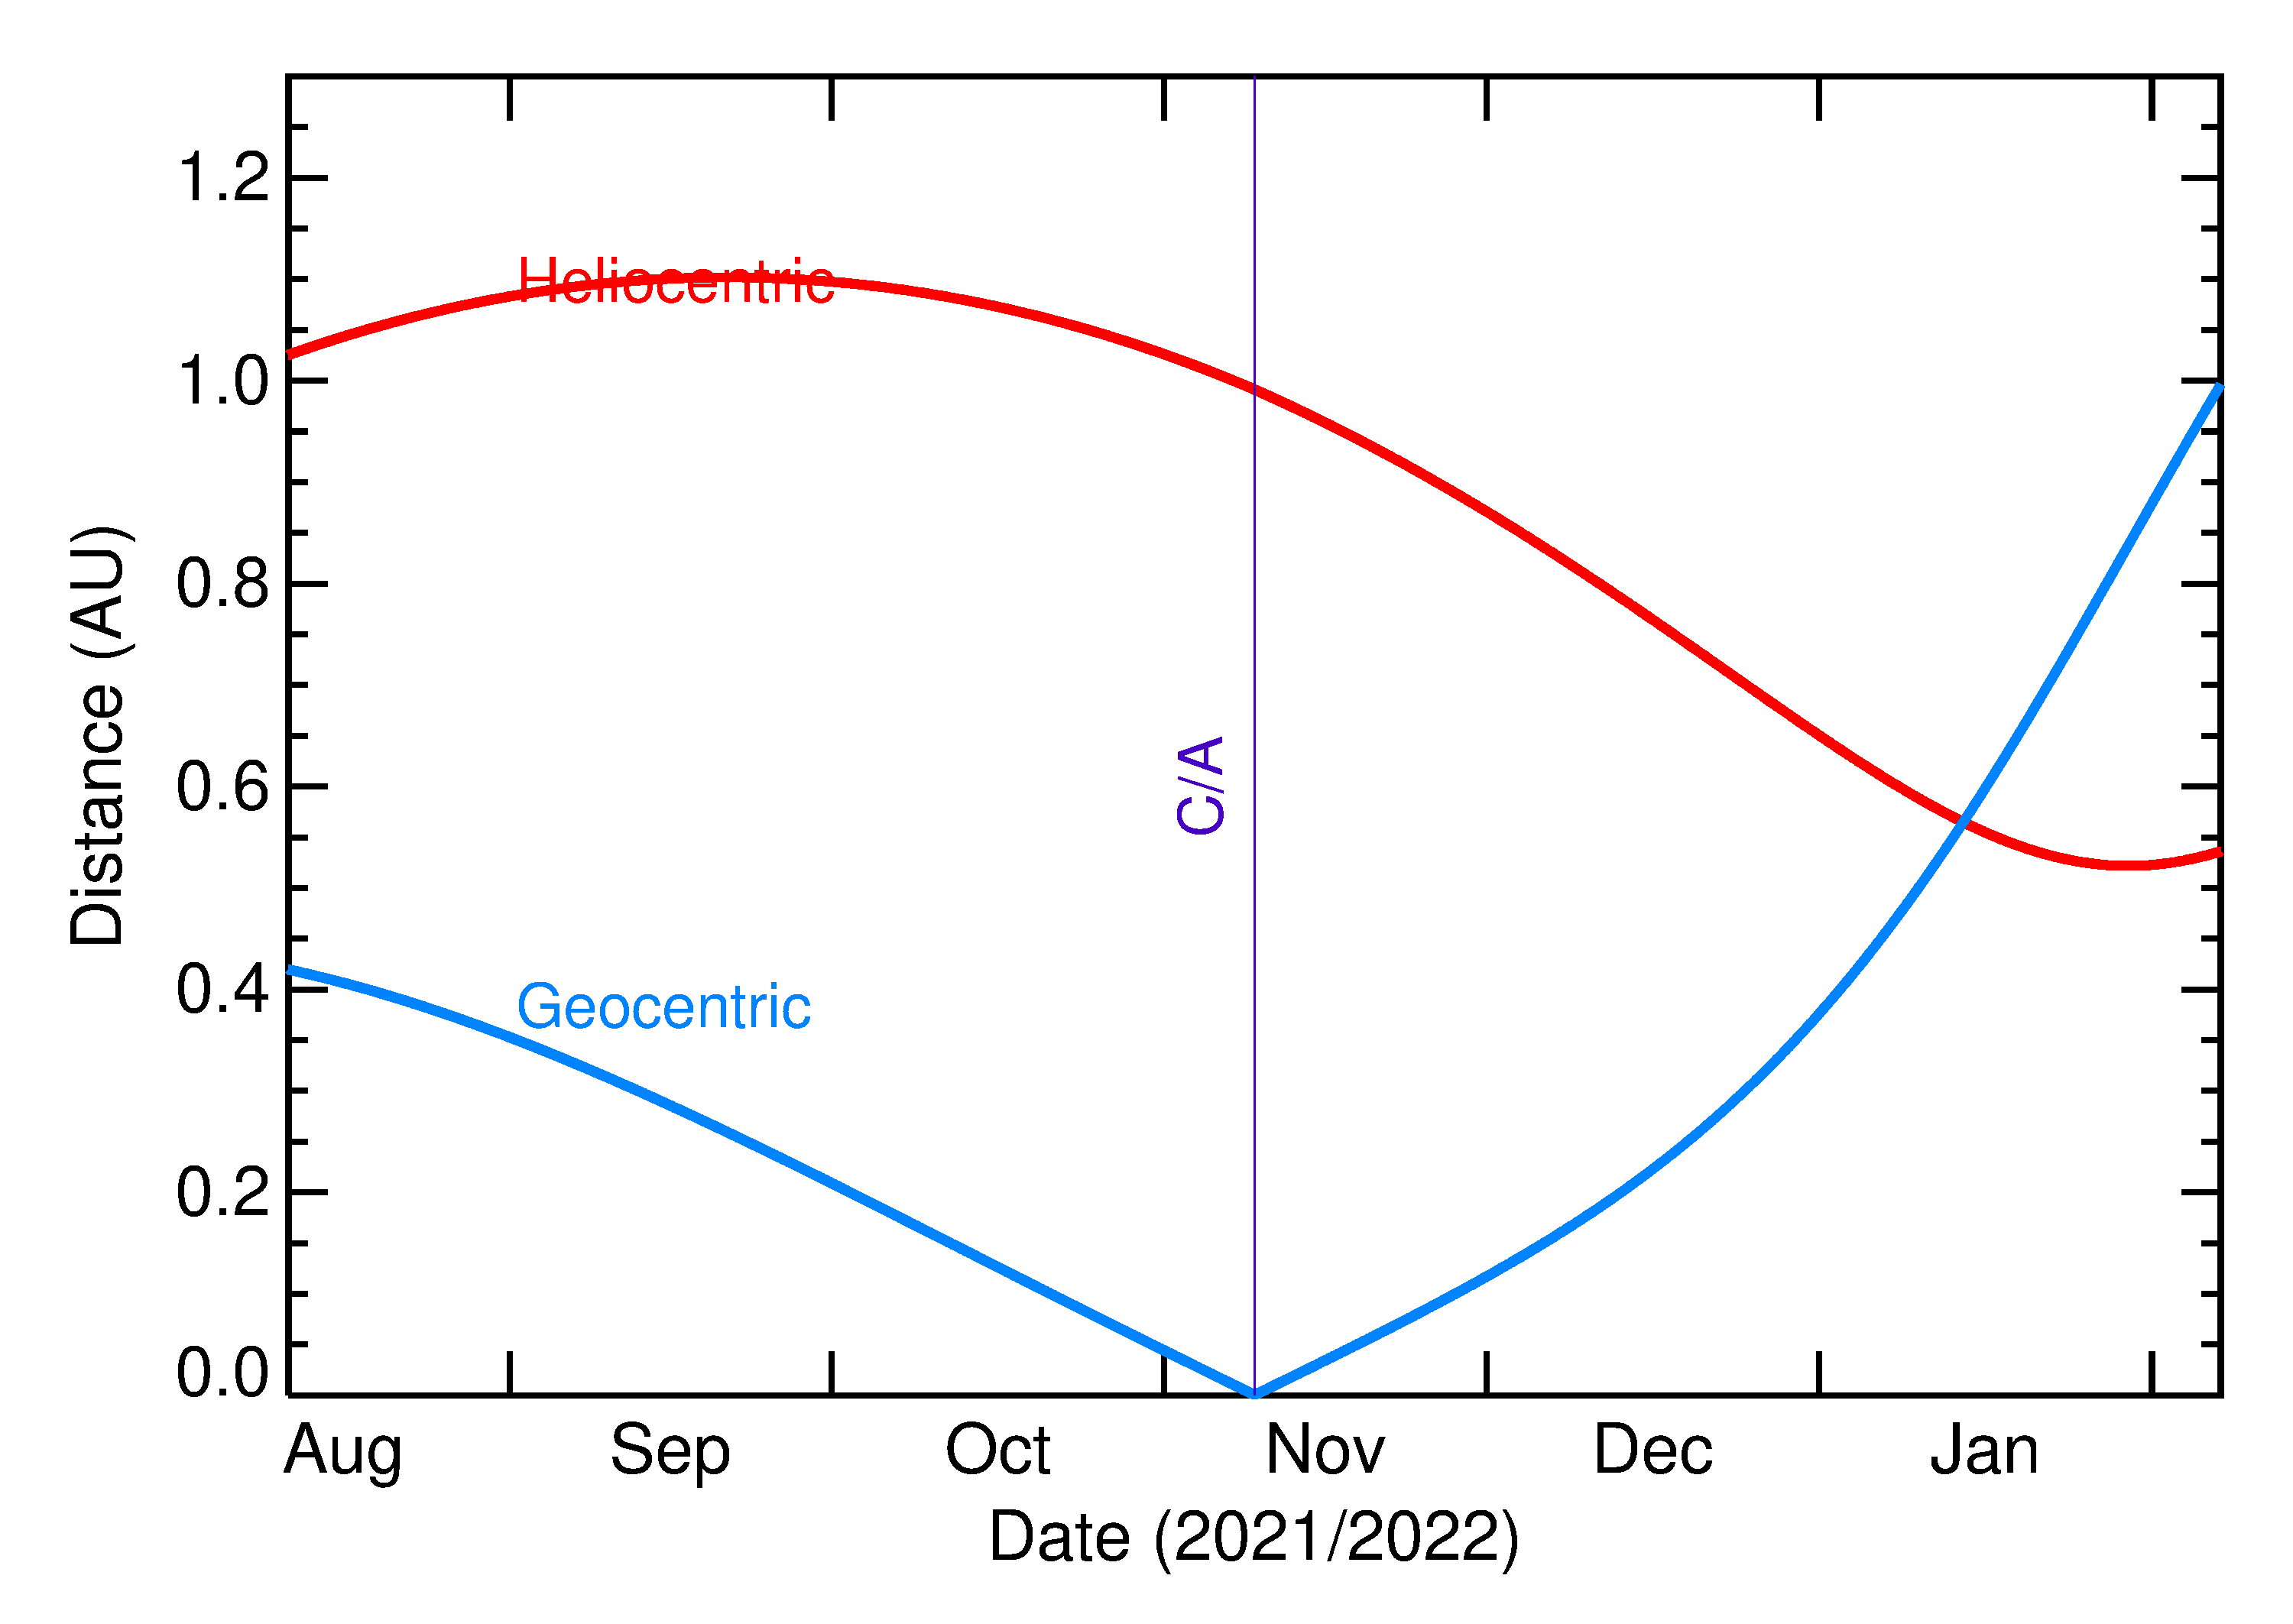 Heliocentric and Geocentric Distances of 2021 VN3 in the months around closest approach